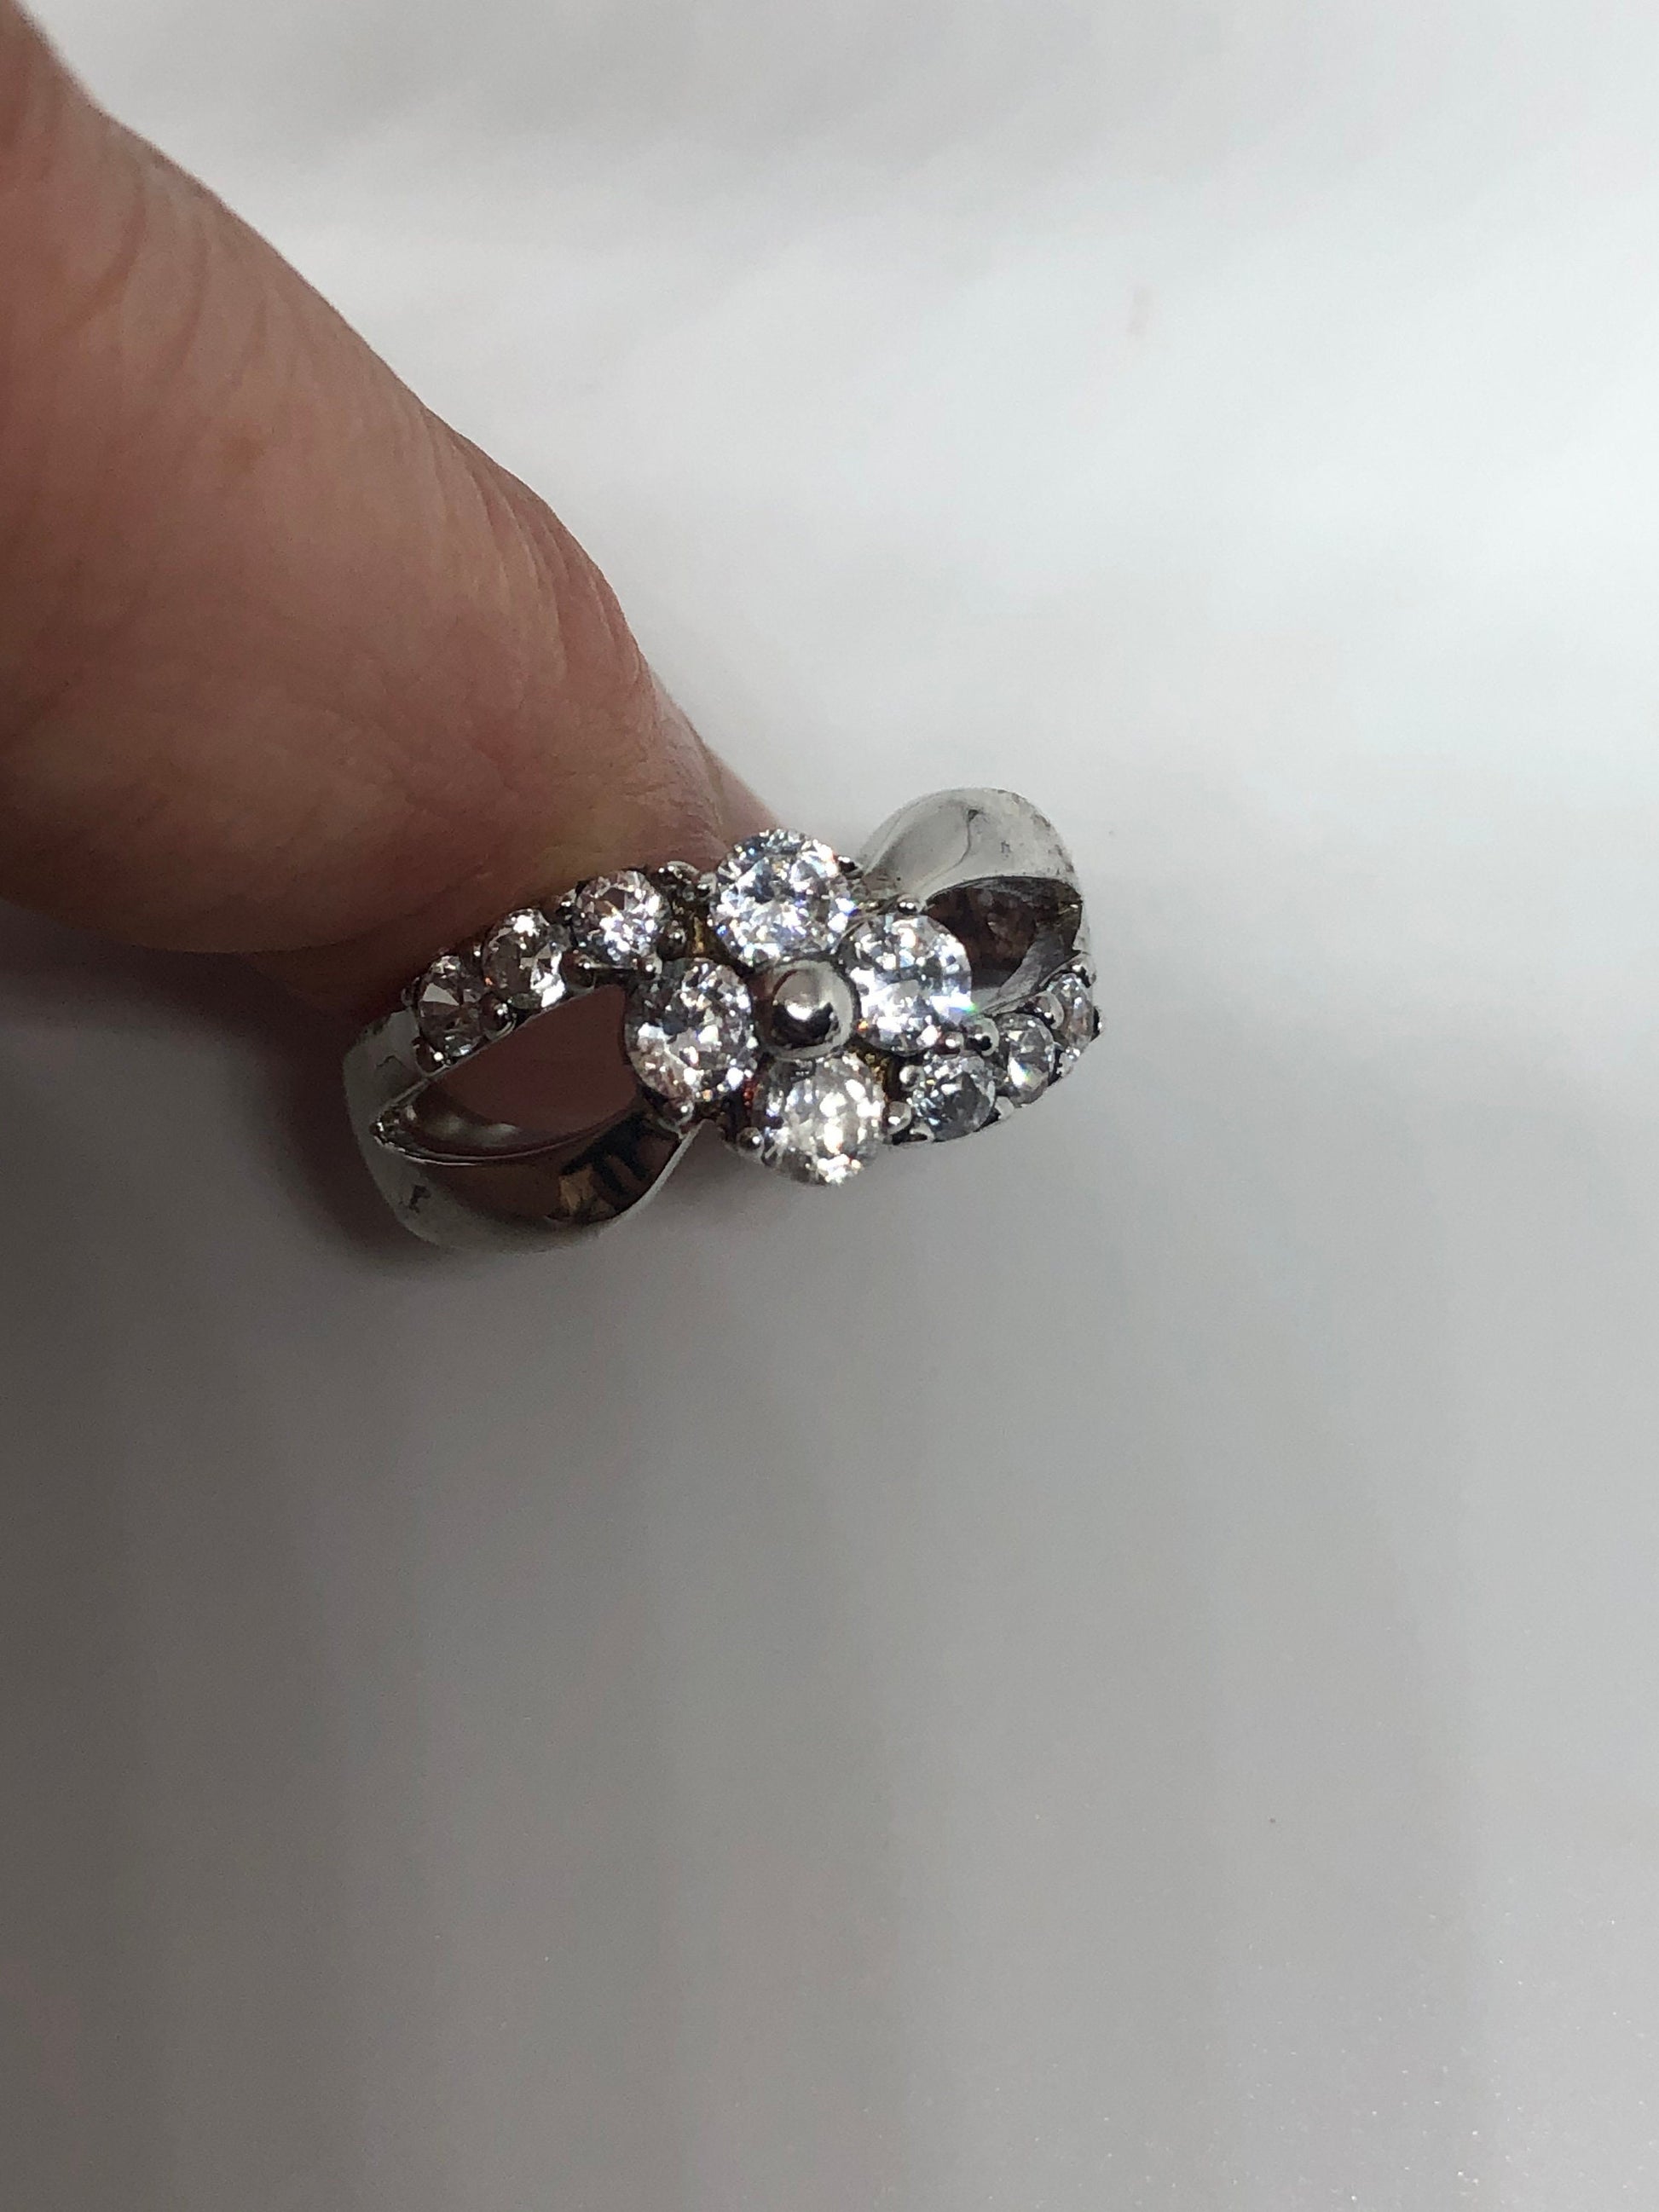 Vintage Clear White Sapphire 925 Sterling Silver Cocktail Ring Size 7